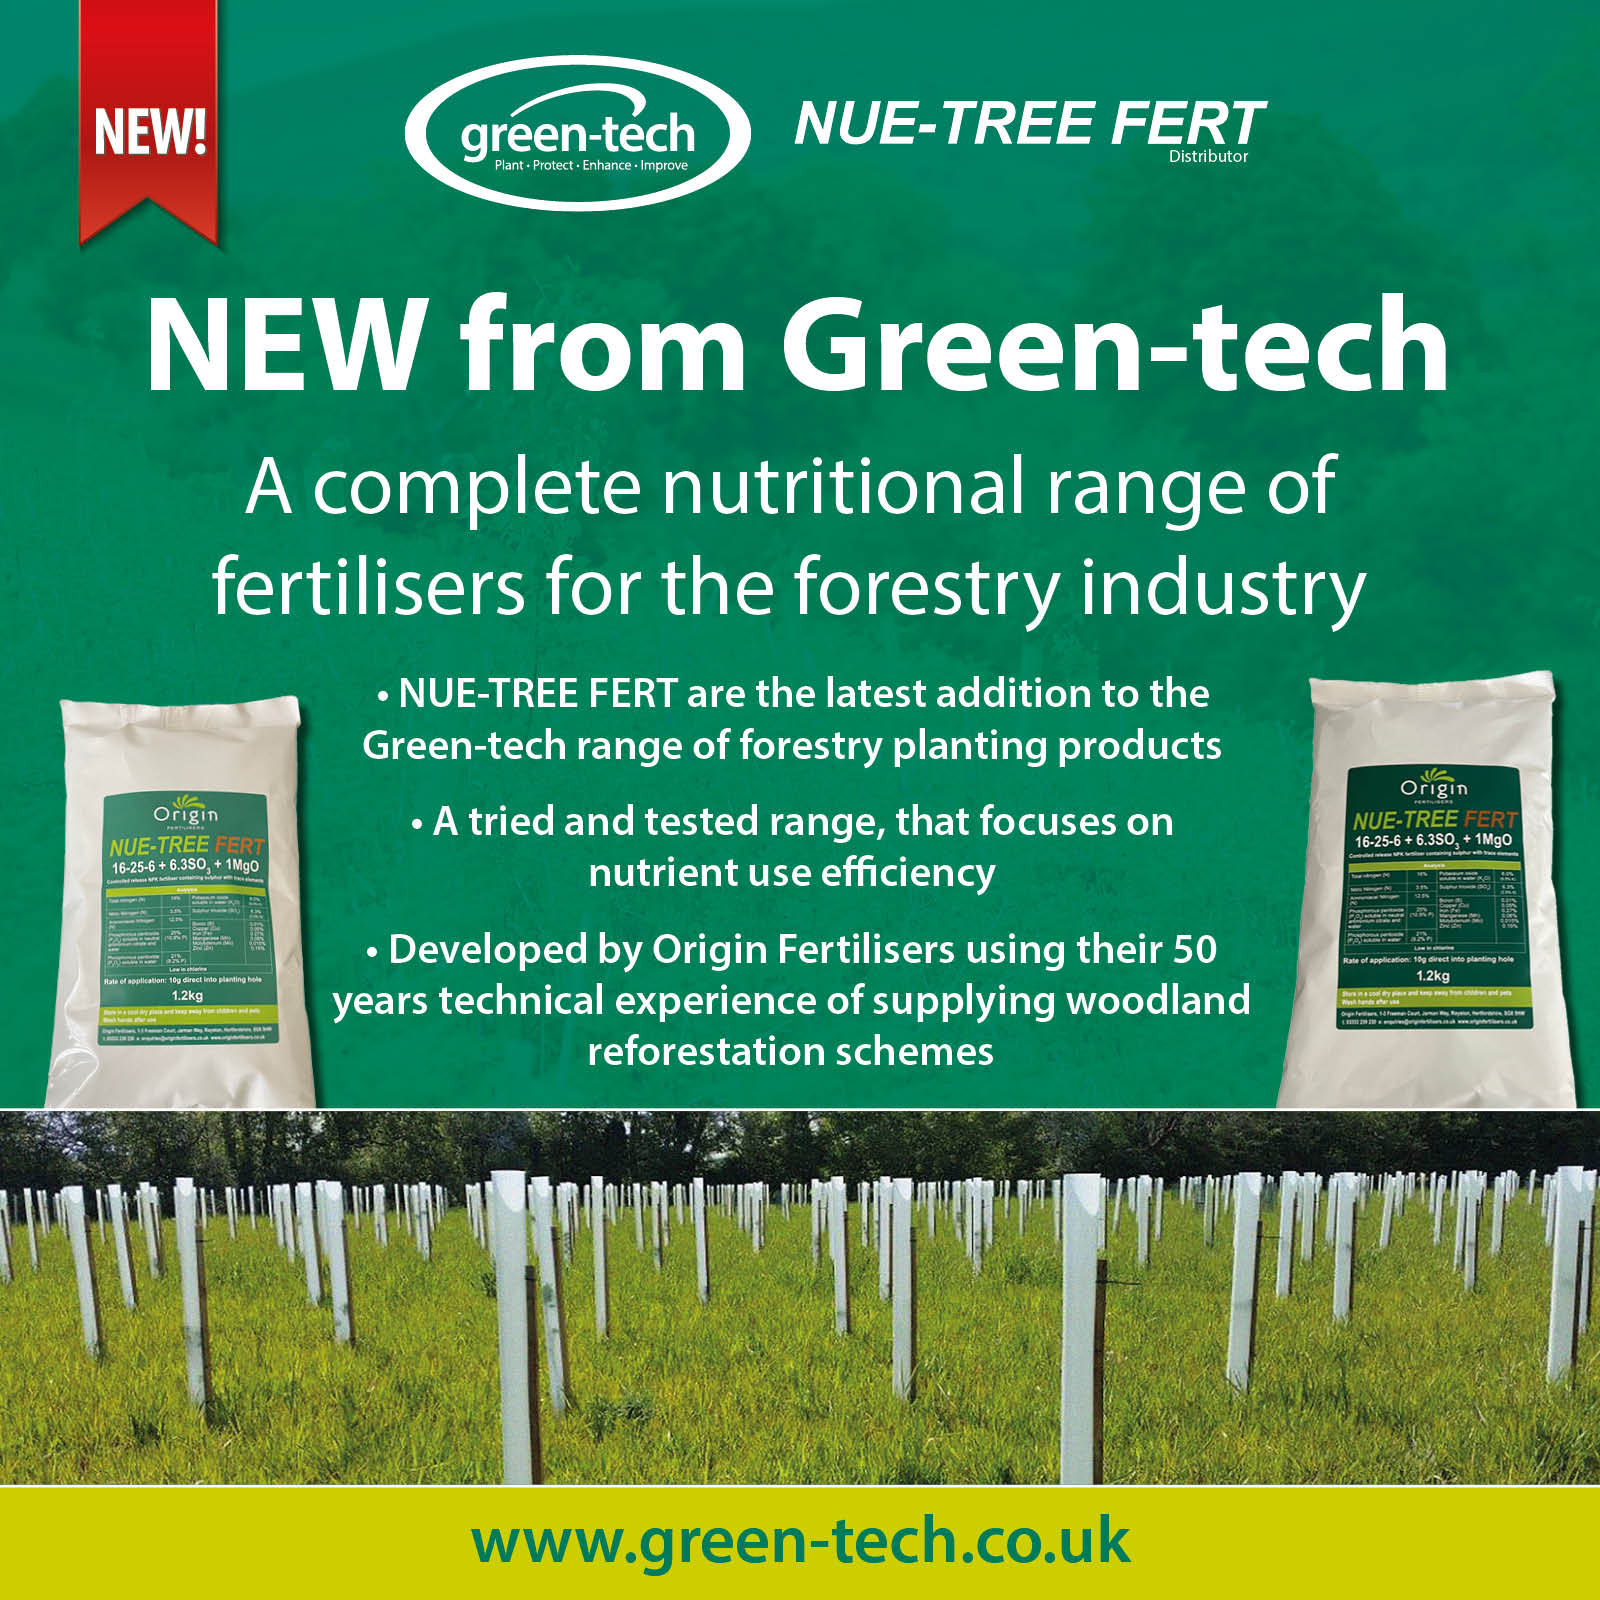 Green-tech become official distributor of NUE-TREE FERT